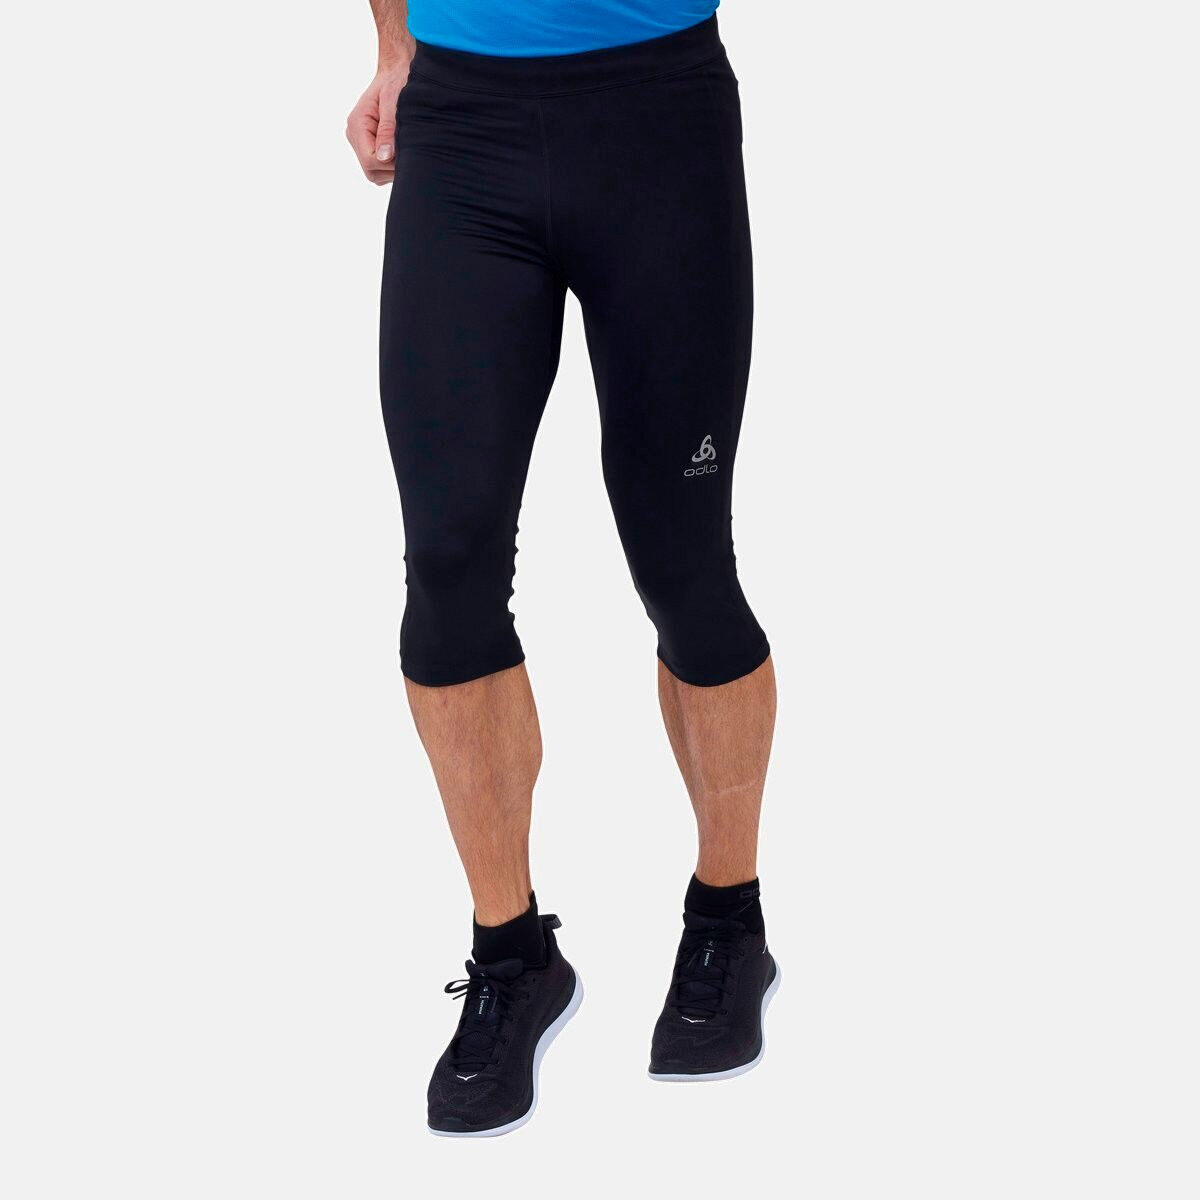 Odlo 3/4 Essential - Collant running homme